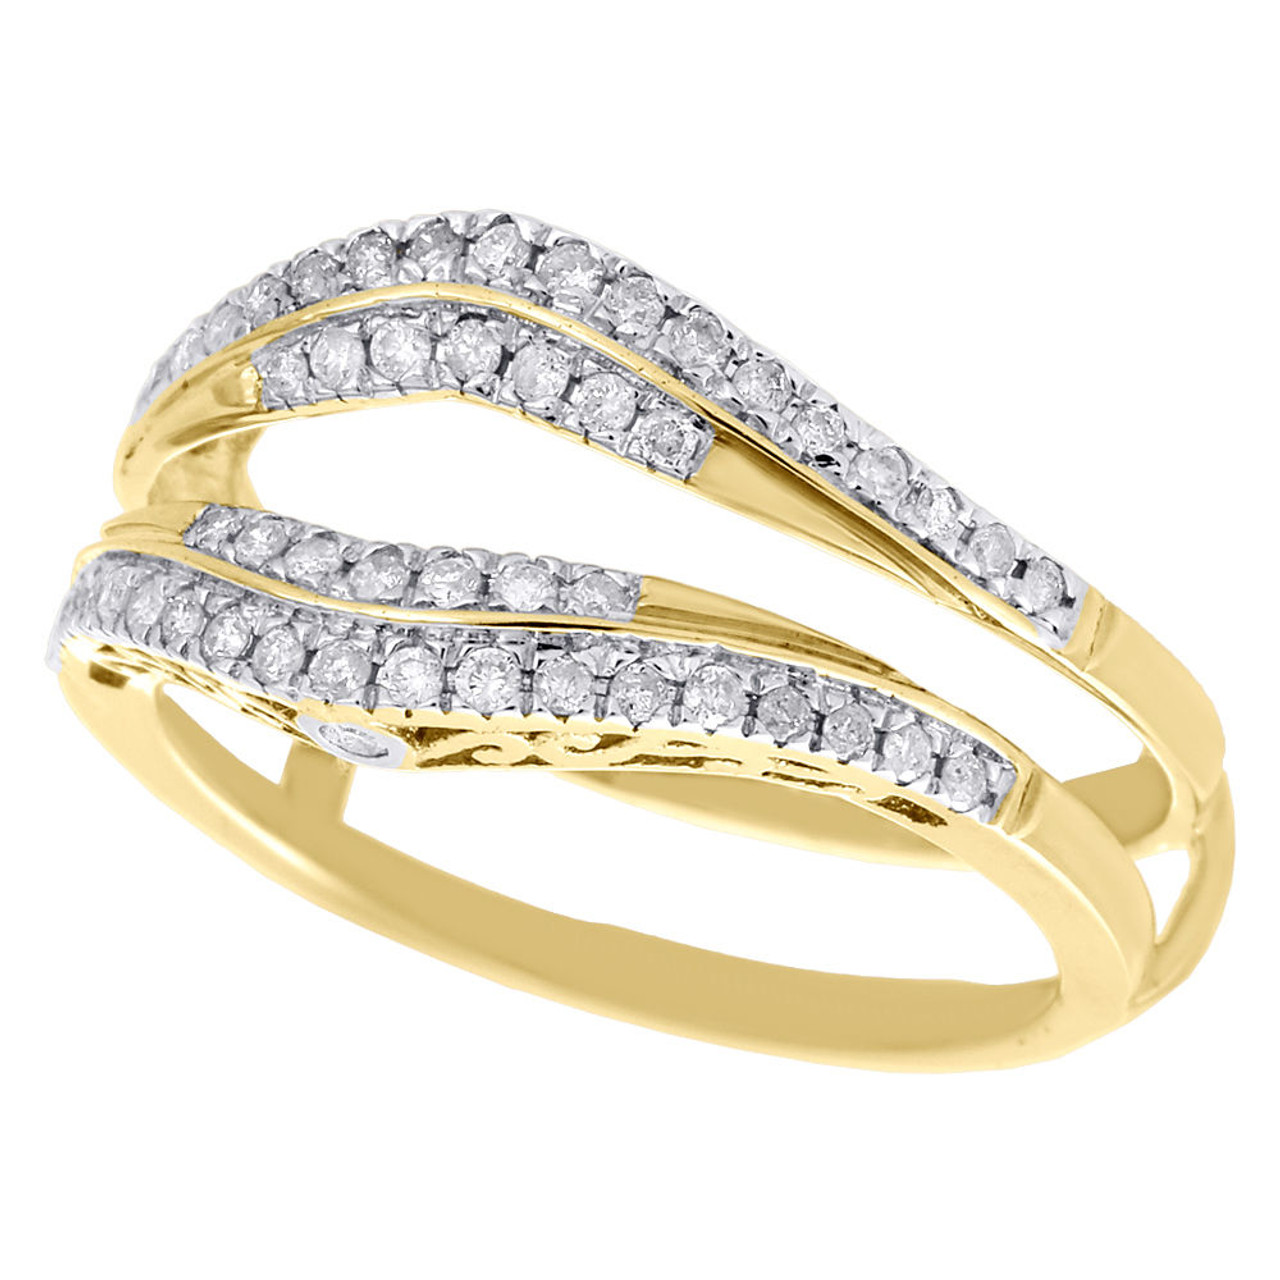 0.44 Ct. Contour Ring Guard Enhancer Wedding Band in Two Tone Gold